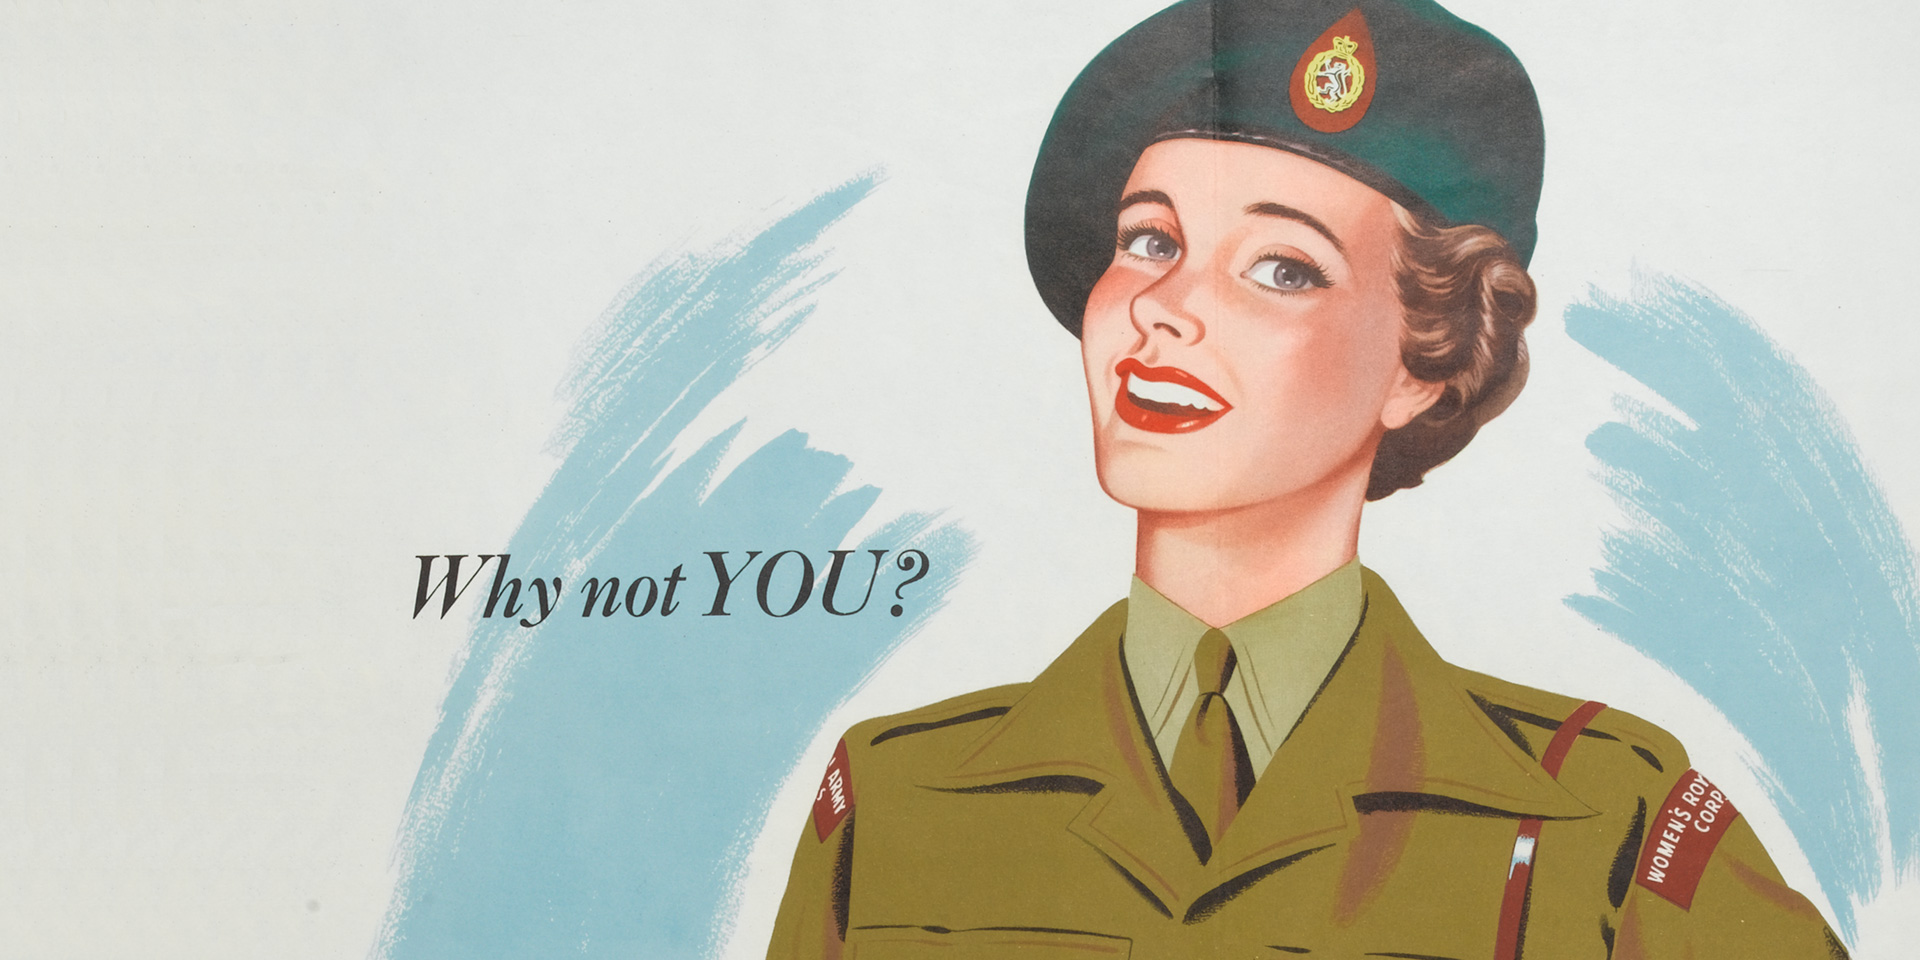 Women's Royal Army Corps recruiting poster, c1950